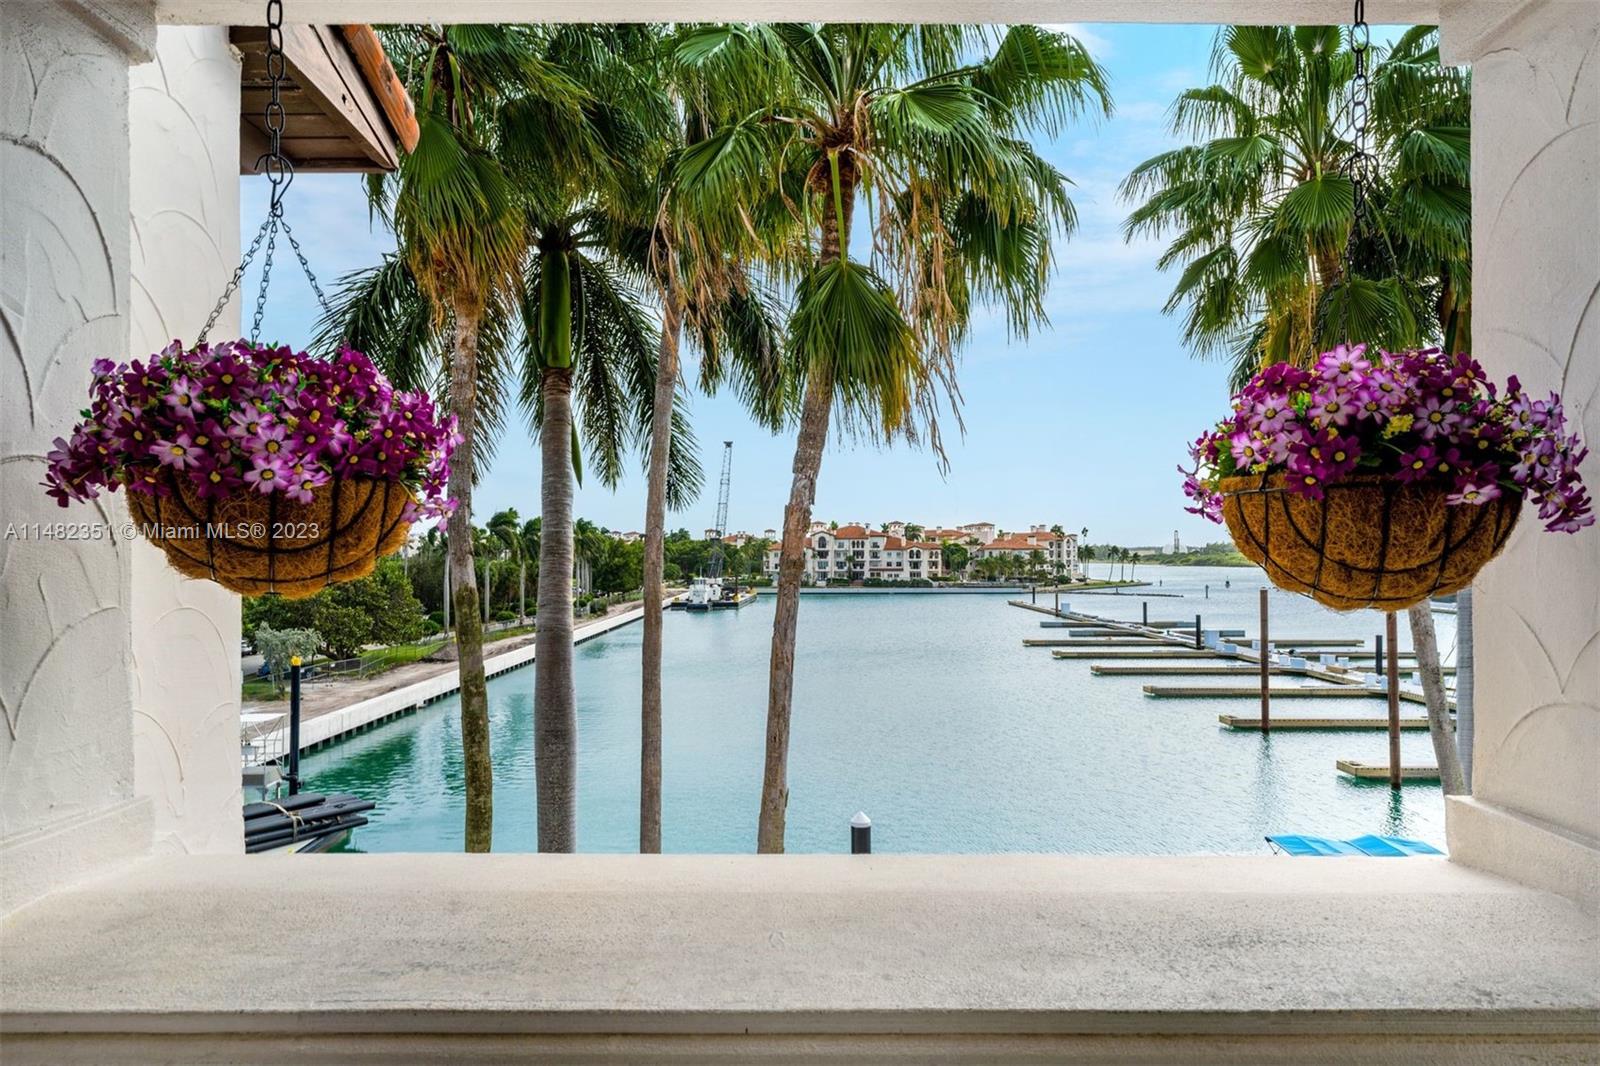 Welcome to this island retreat, a charming studio w/ 1 bath, on exclusive Fisher Island. Reachable only by ferry or boat, Fisher Island offers a unique & tranquil setting for those seeking a luxurious escape from the mainland. Well-appointed studio suite is the perfect oasis for those in search of peaceful island getaway. With everything you need at your fingertips, you can simply unpack & unwind as all the necessities for your stay are provided. Enjoy marble floors throughout the unit or step outside onto your private terrace, to be greeted by breathtaking views of the marina. The allure of the Island doesn't end at your doorstep w/ club membership, you gain access to an array of world-class amenities: 2 marinas, heliport, tennis courts, golf, pools, spa, restaurants, and private beach